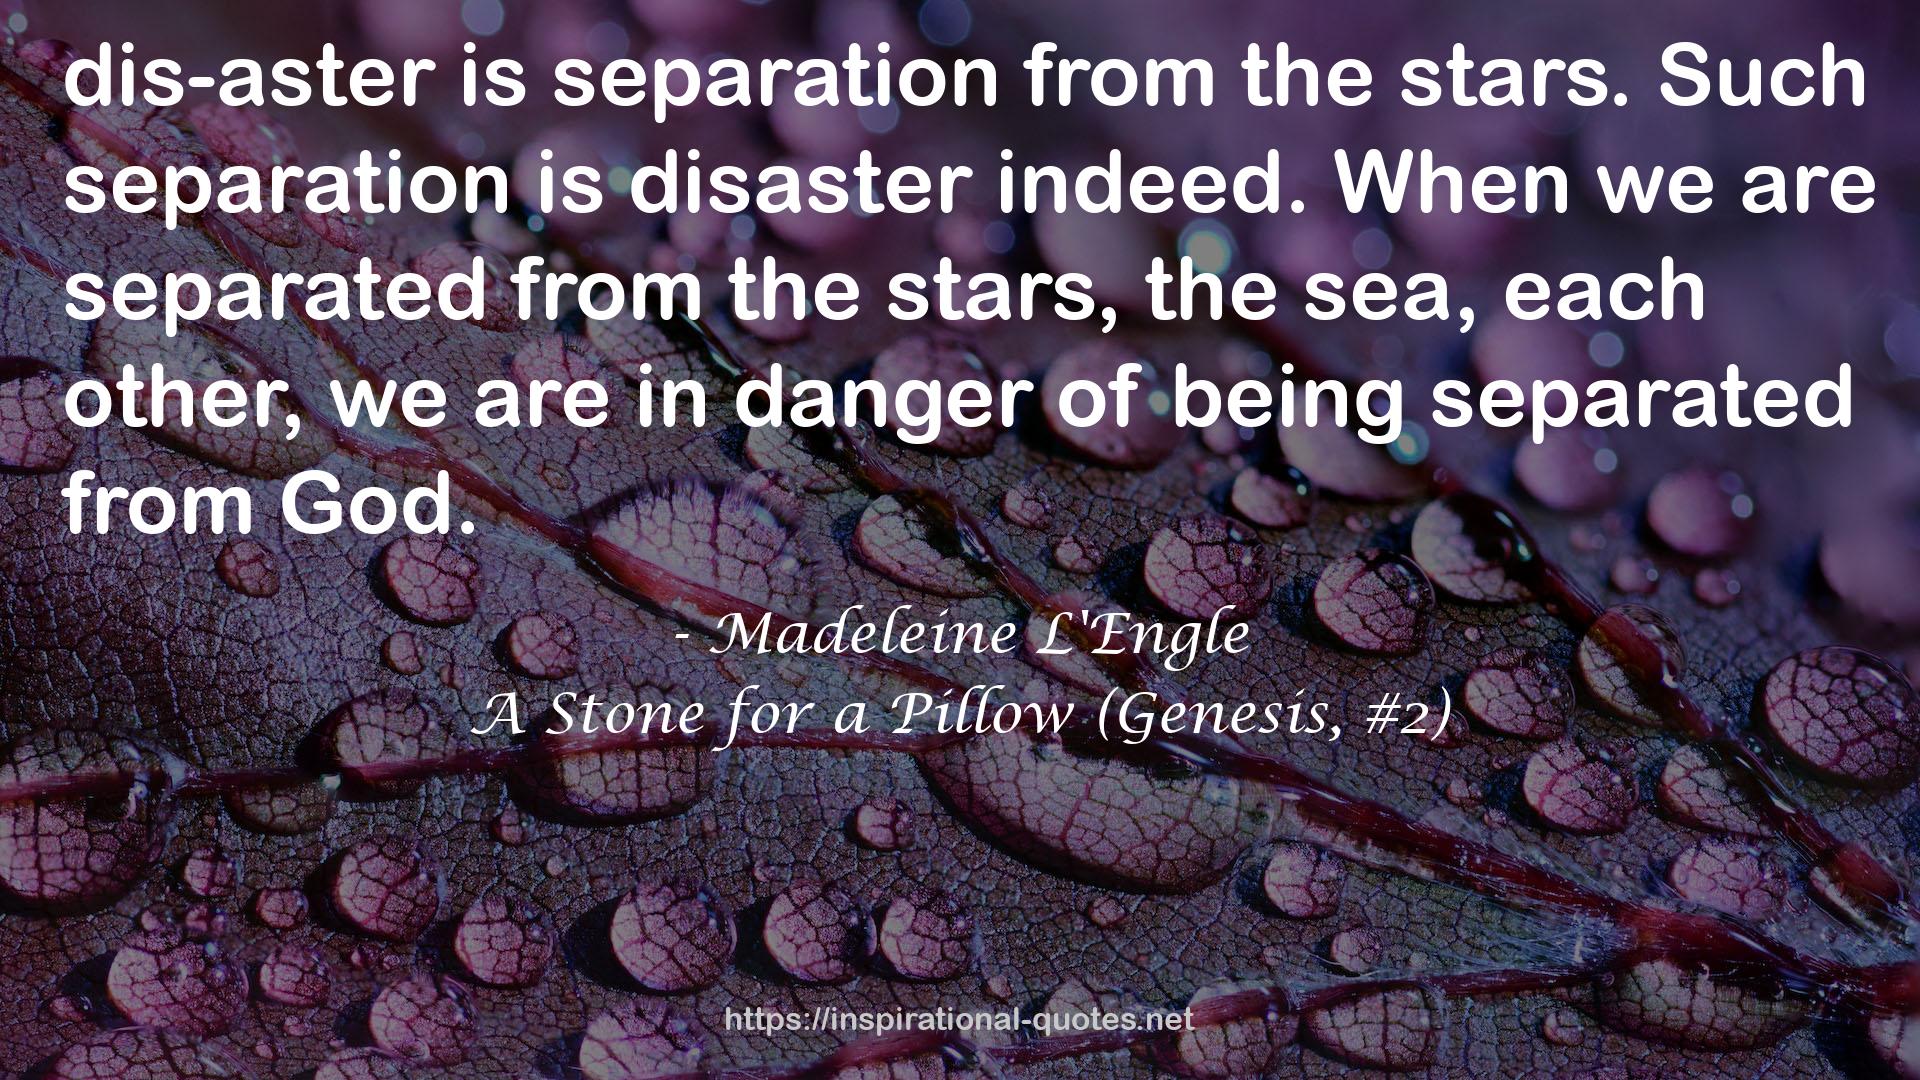 A Stone for a Pillow (Genesis, #2) QUOTES